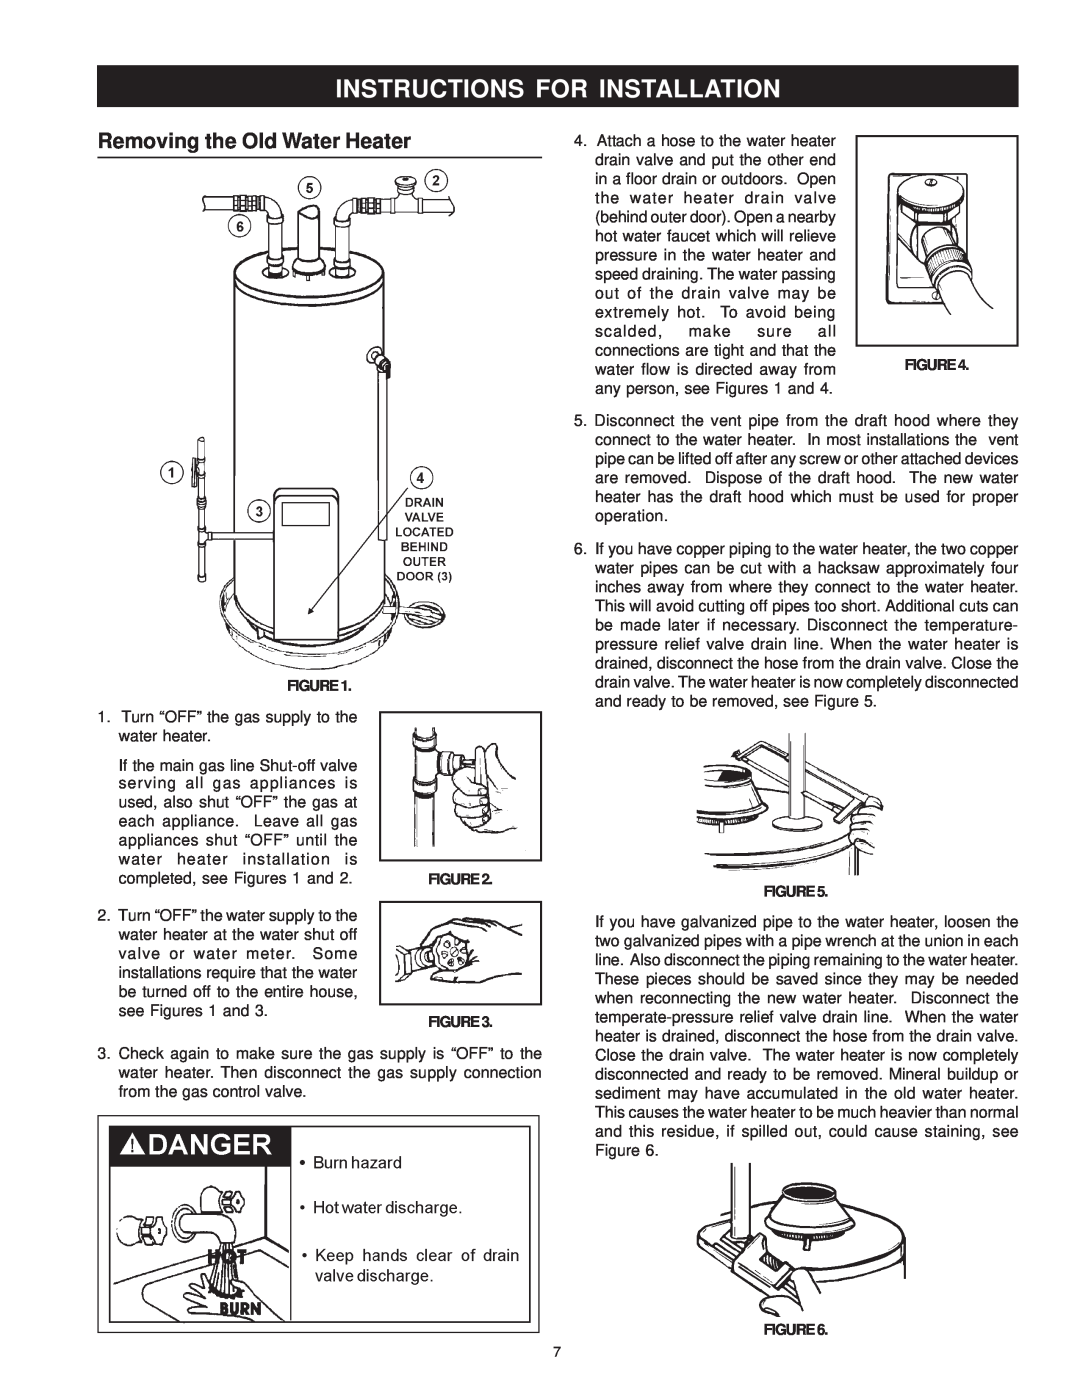 Maytag HRN31250Q, HRN11240X, HRN11250Q, HRP31240X, HRP11240X Instructions For Installation, Removing the Old Water Heater 